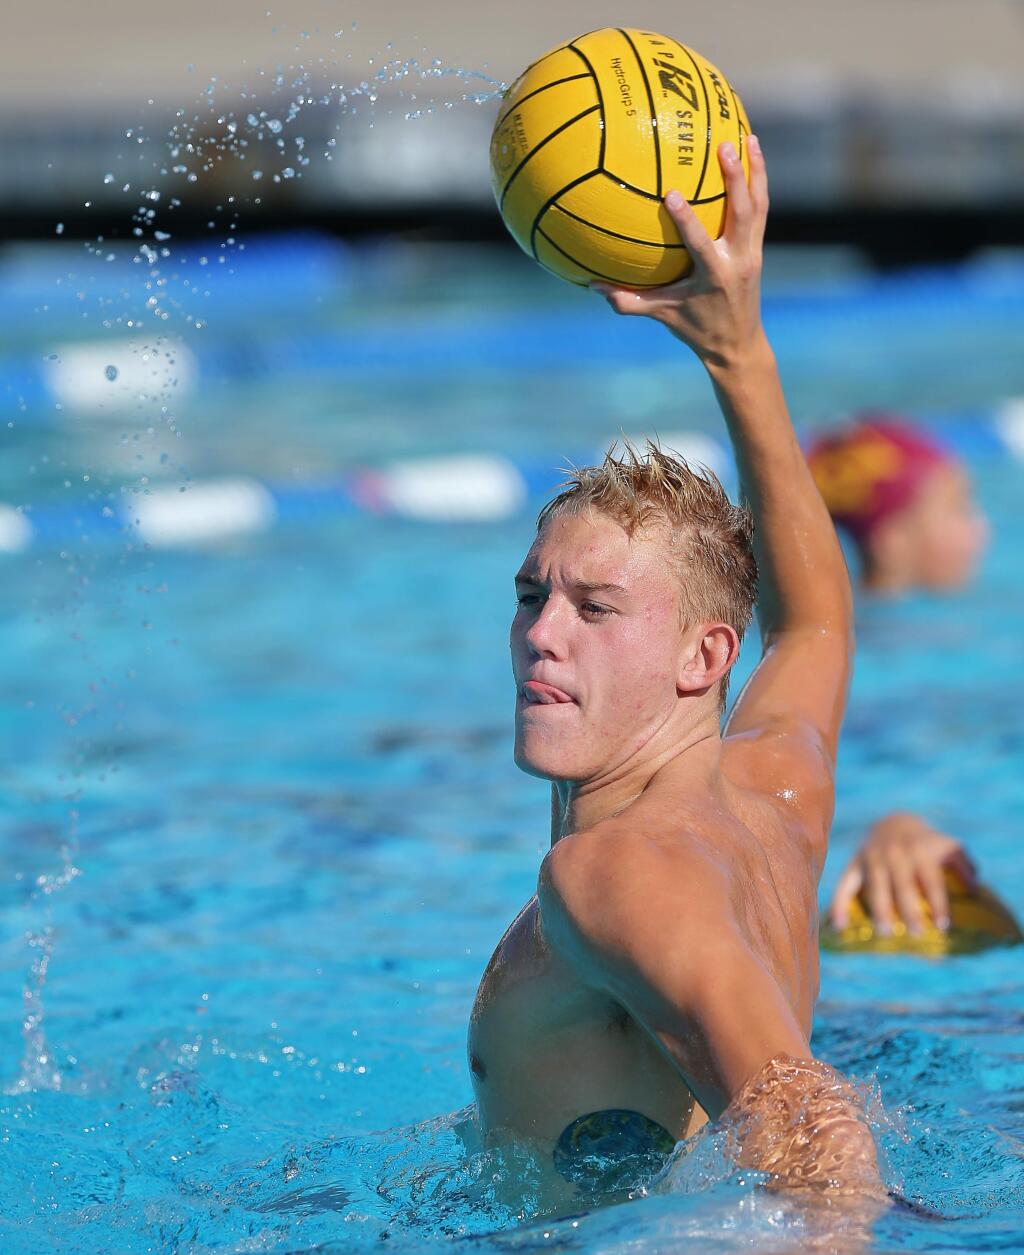 Cardinal Newman water polo player Gavin Homer takes a shot on goal during practice in Santa Rosa on Monday, Sept. 16, 2019. (Christopher Chung / The Press Democrat)